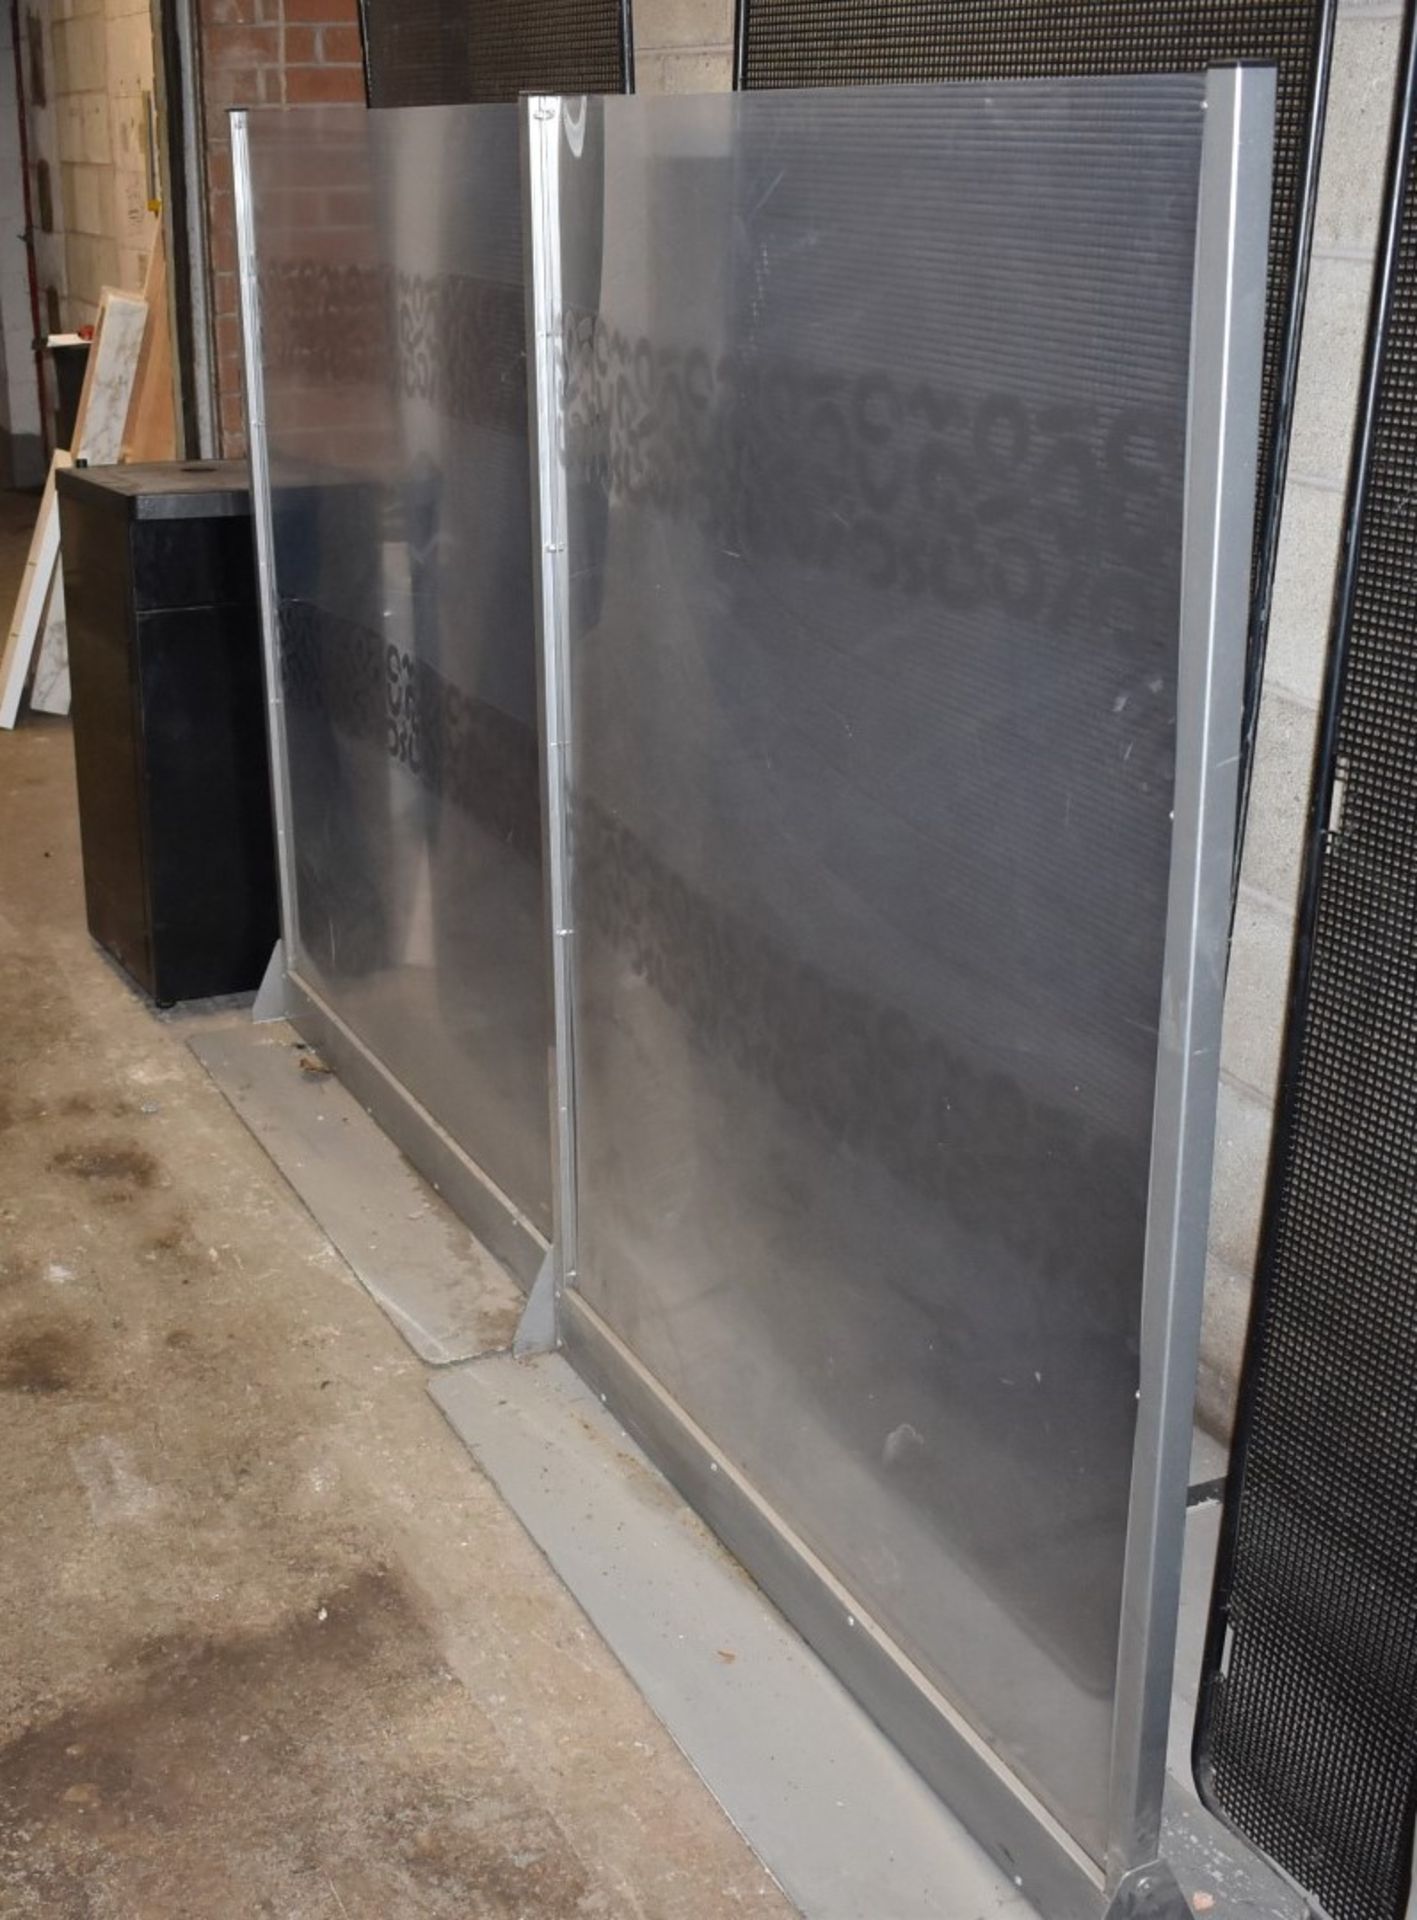 2 x Freestanding Covid Divider Screens - Recently Removed From a Supermarket Environment - CL011 - - Image 3 of 3